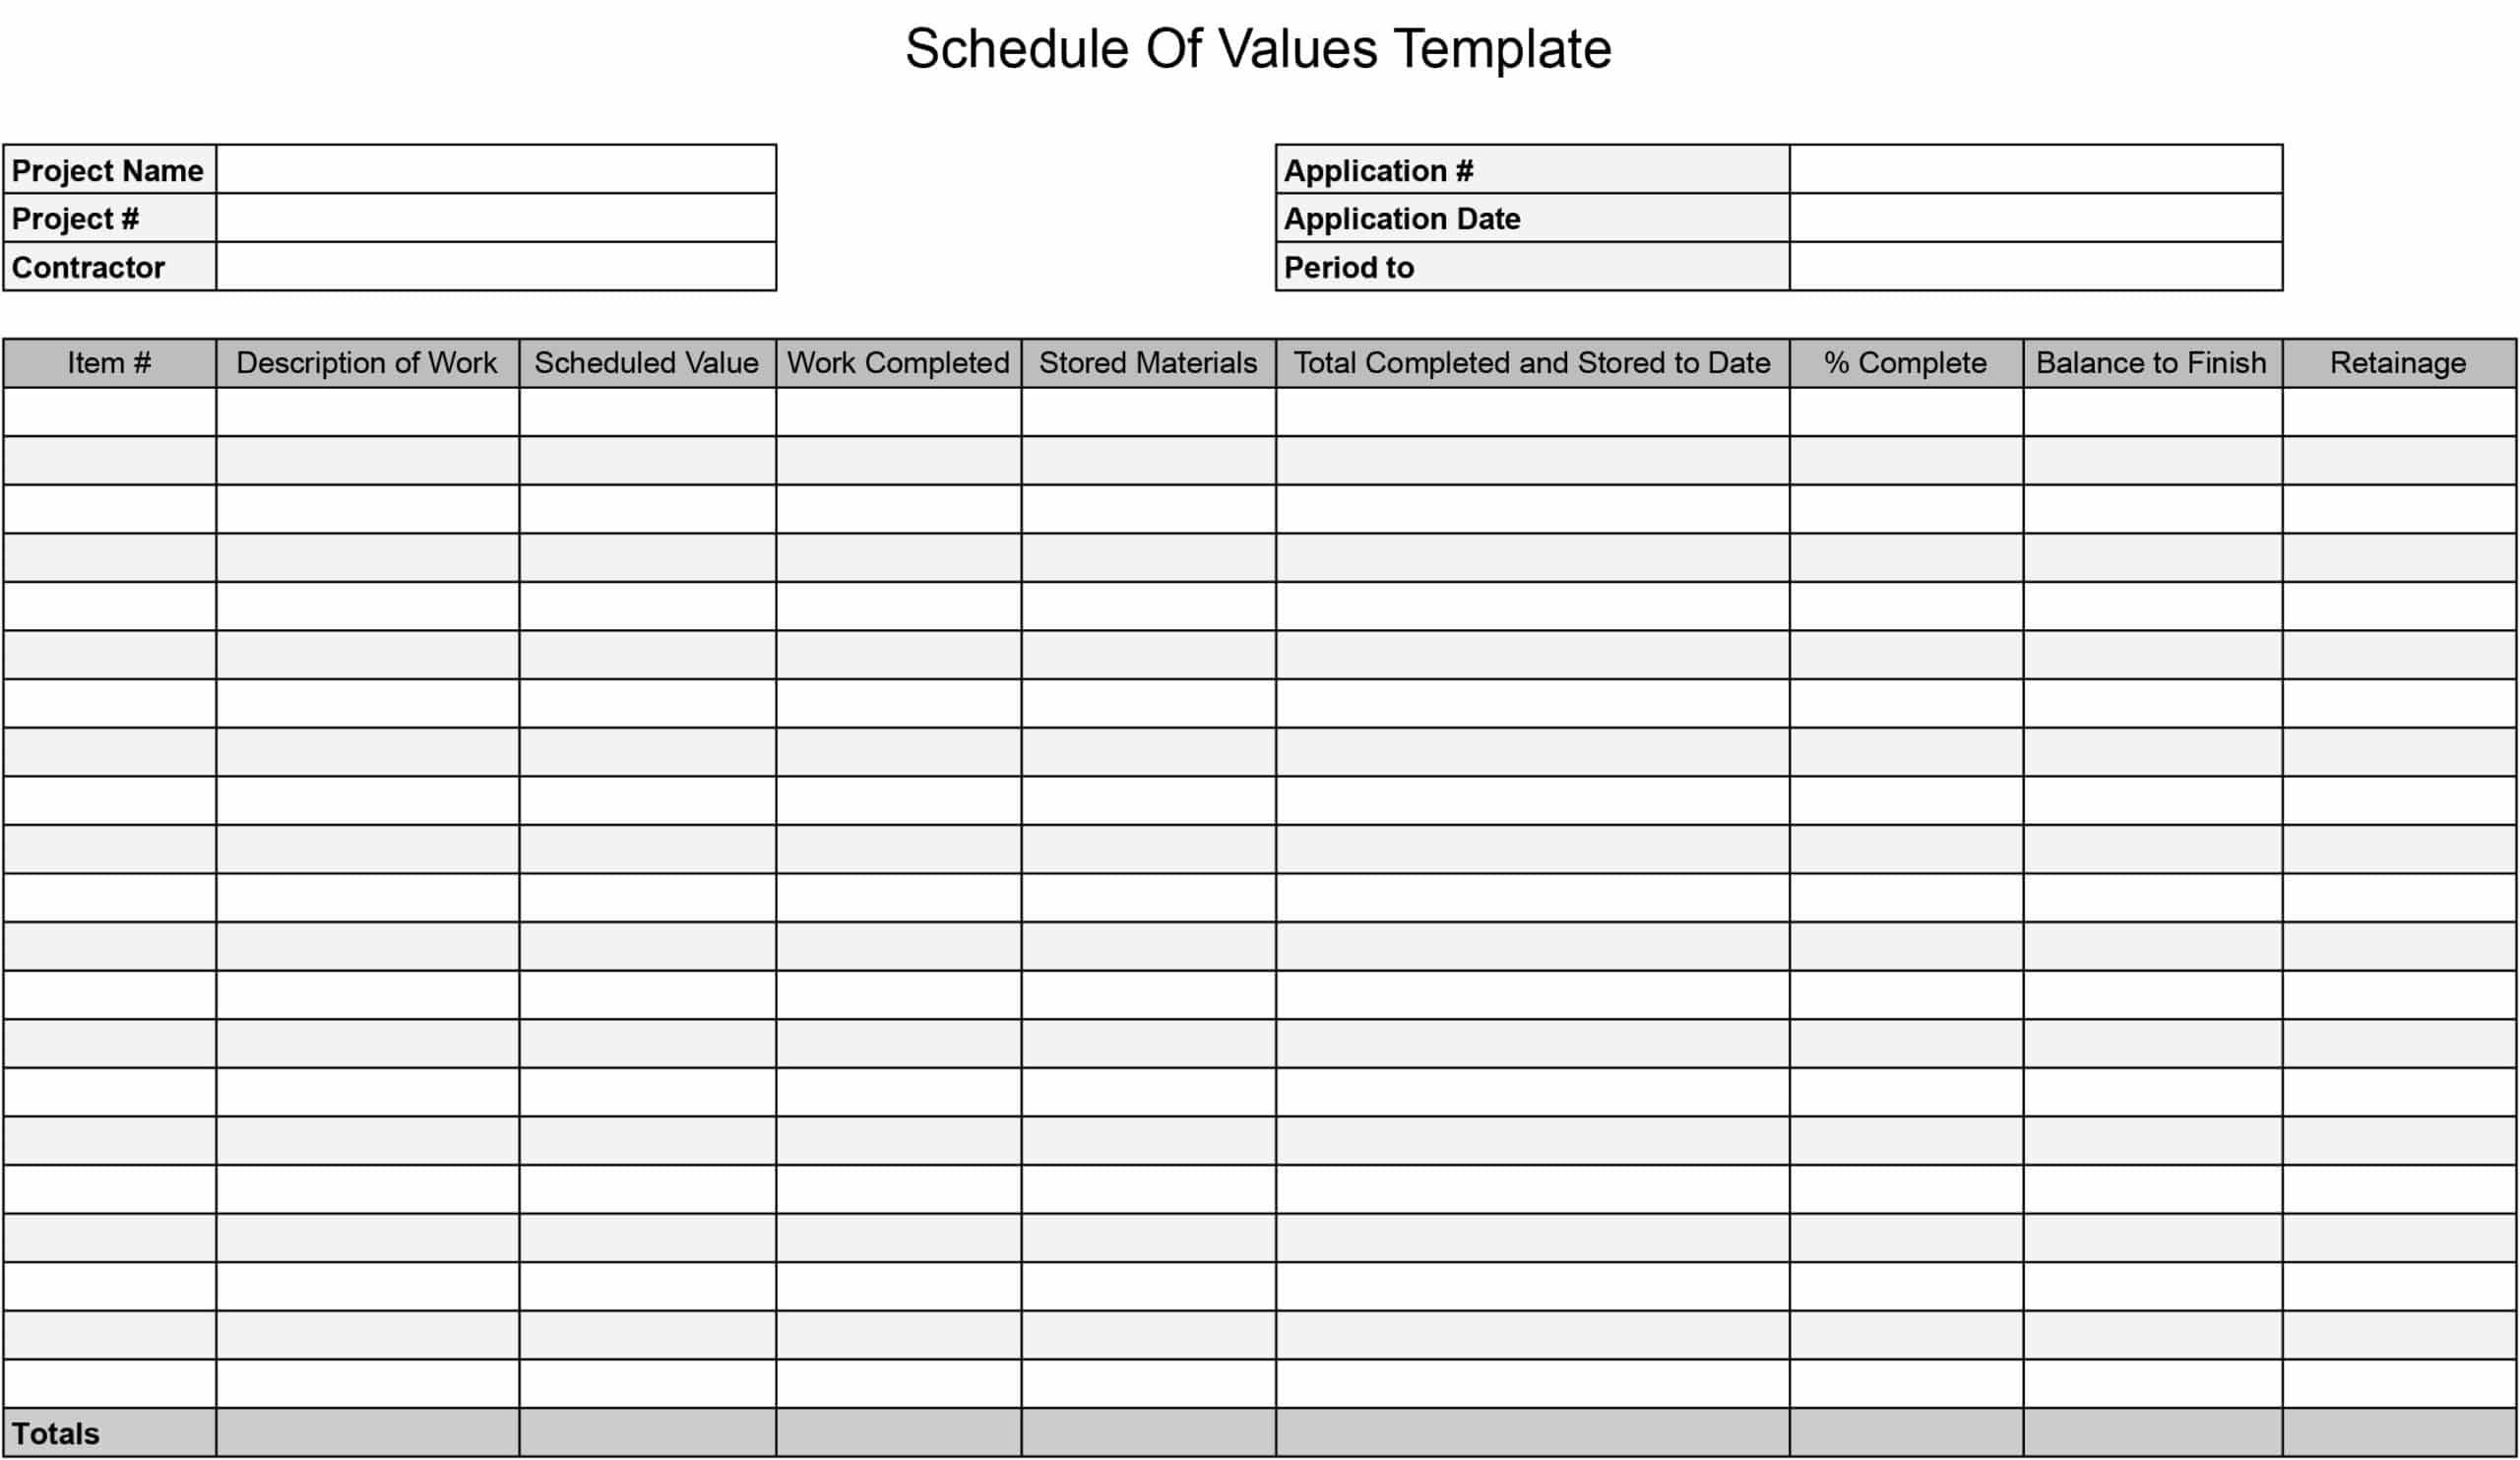 Schedule Of Values Template